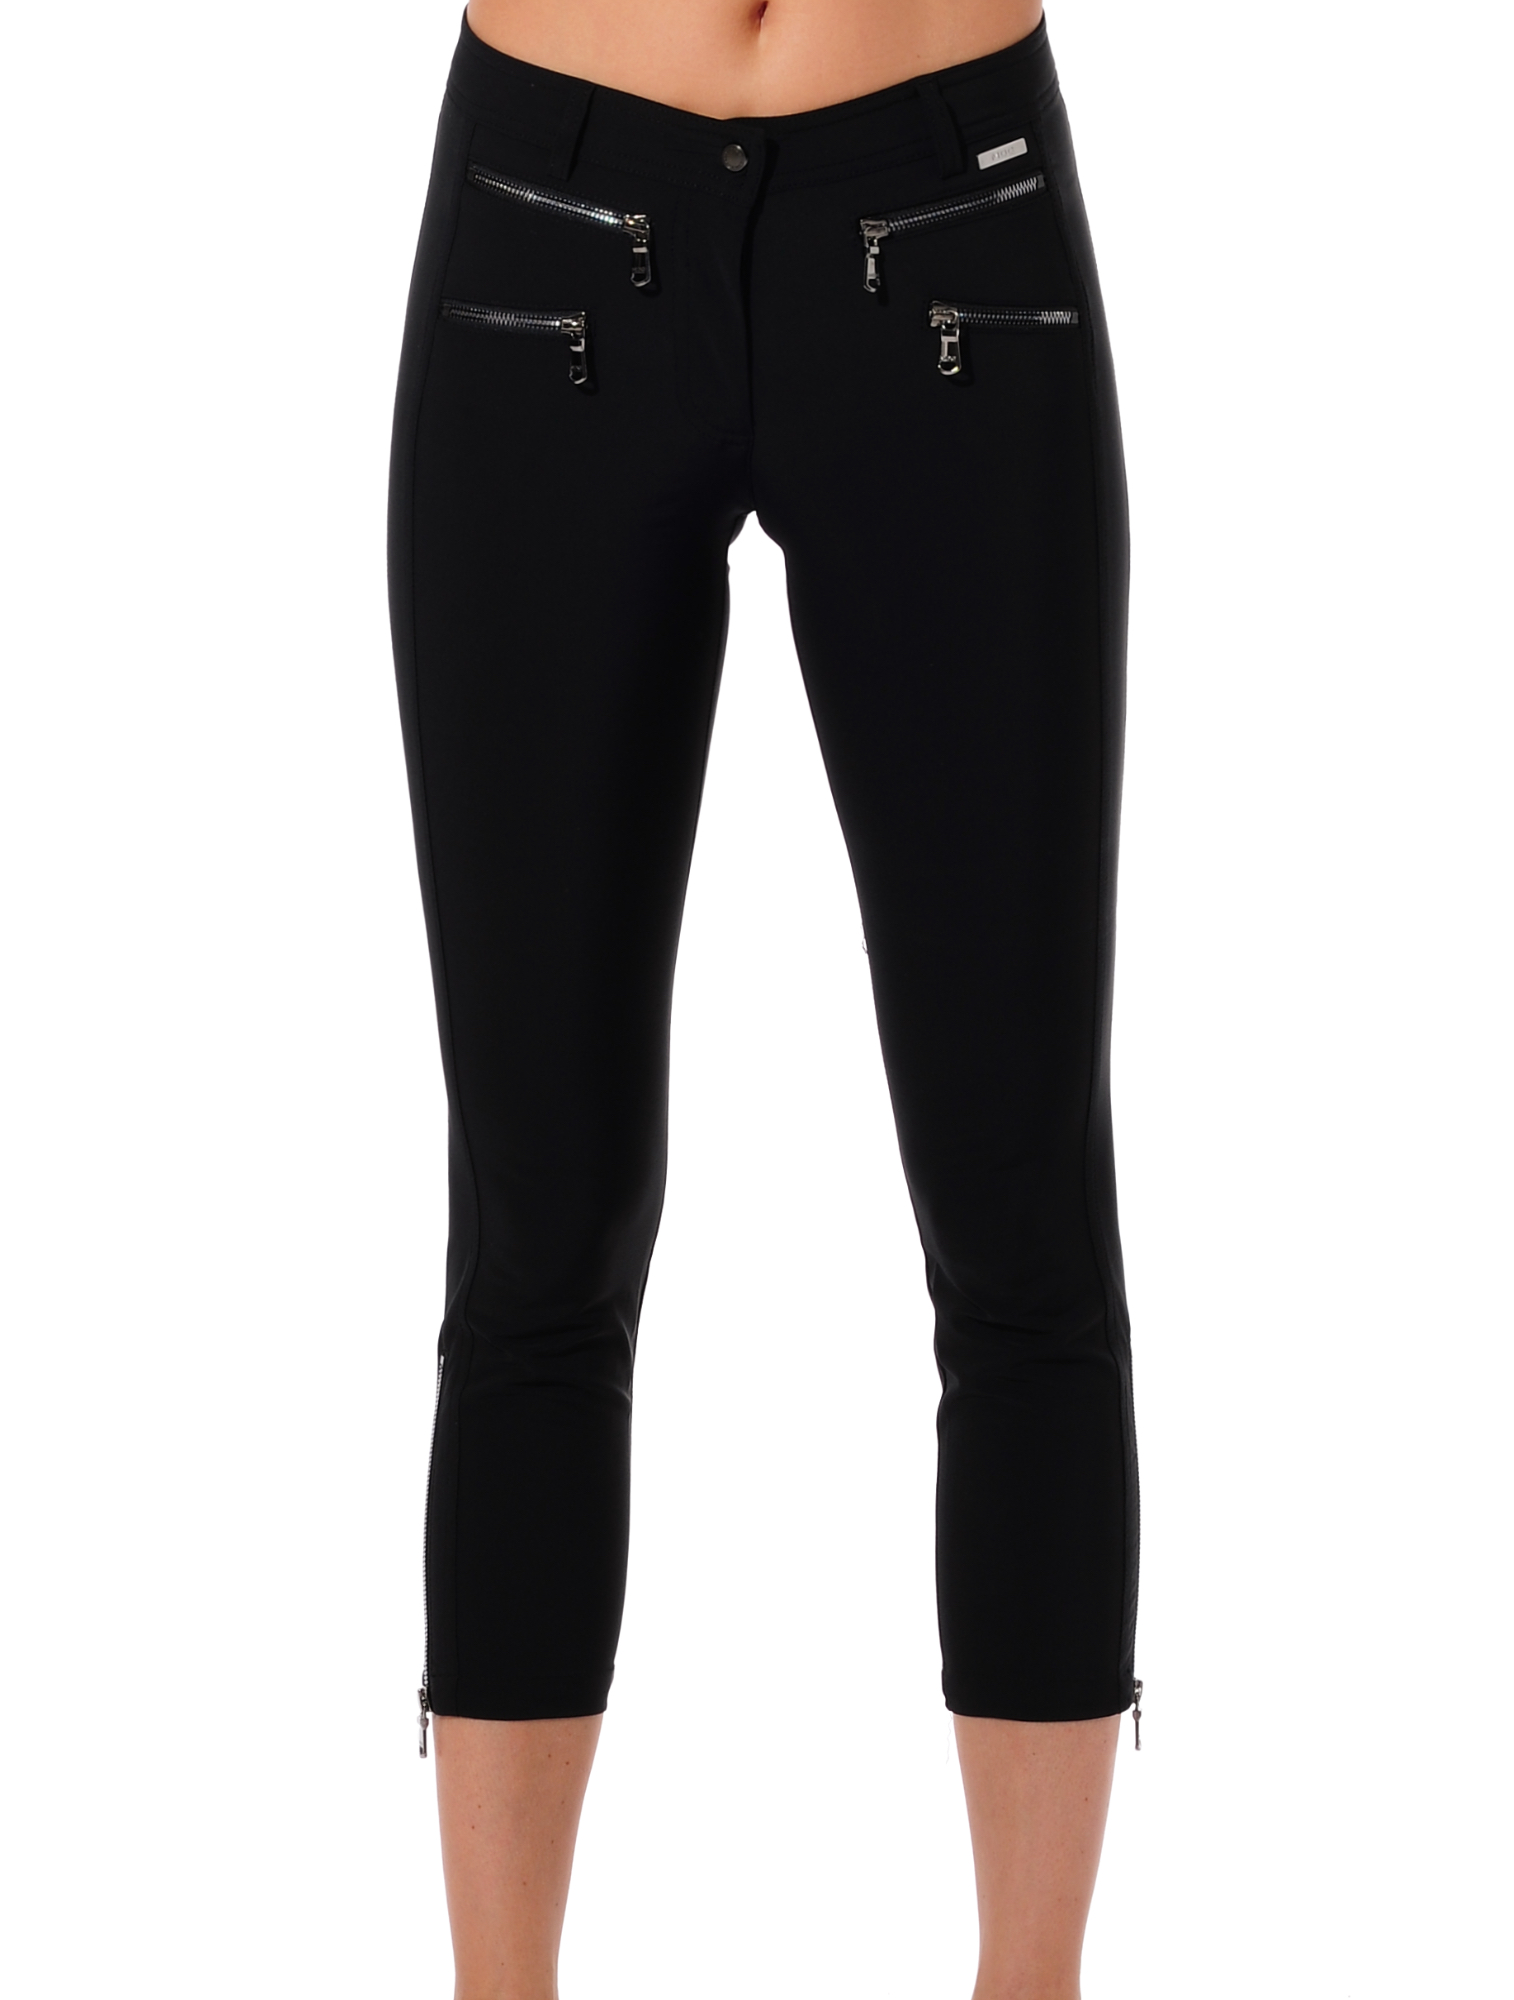 4way stretch double zip cropped pants black 